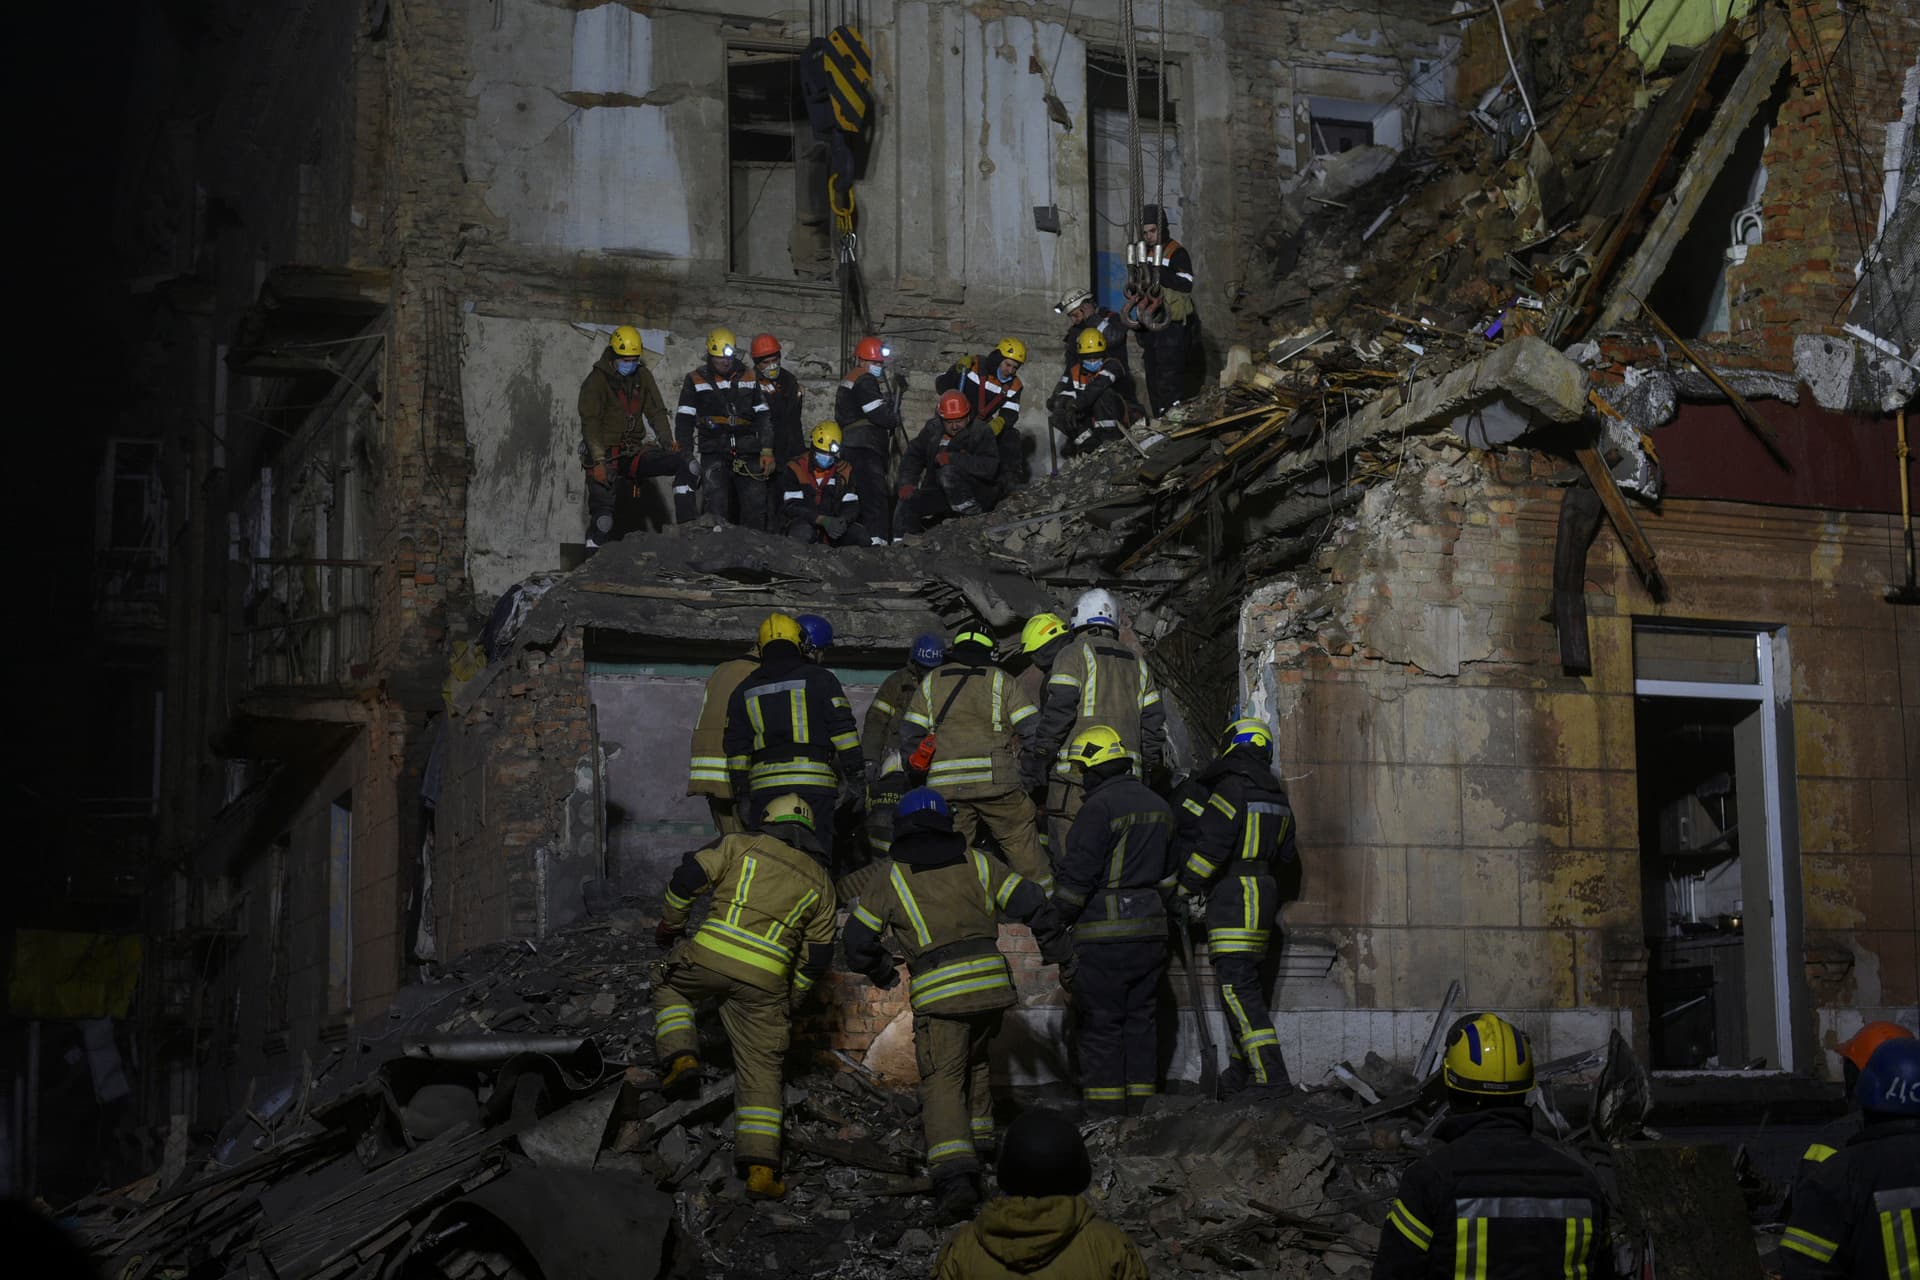 Rescuers work at the site of a residential building damaged by a Russian missile in Kryvyi Rih